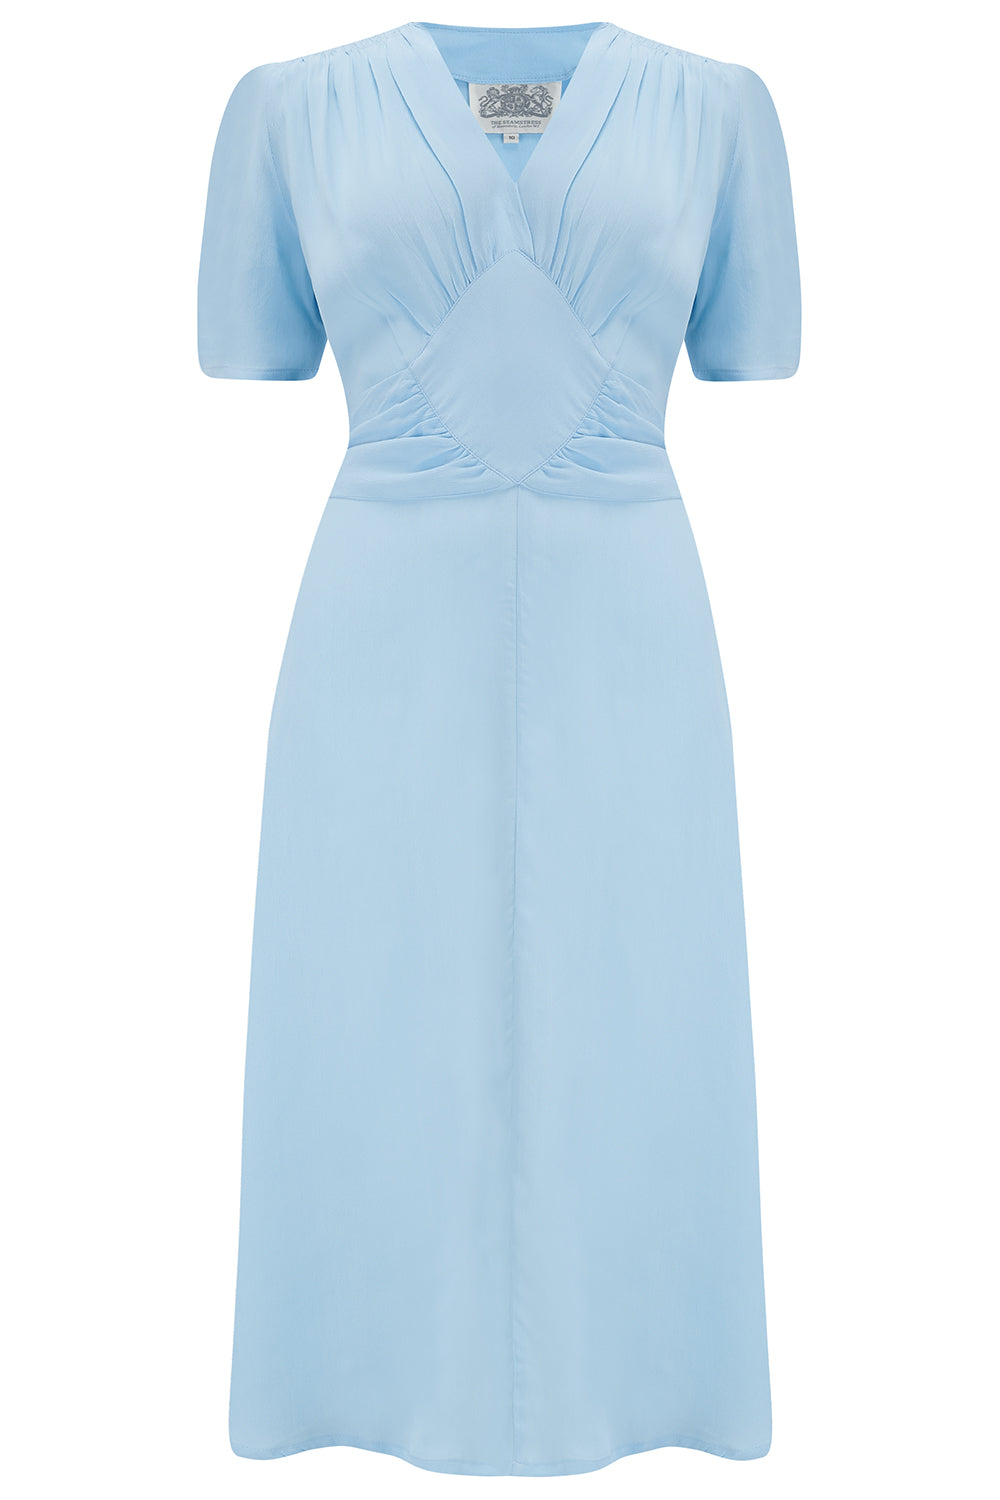 Ruby Dress in Powder Blue, A Classic & Authentic 1940s Vintage Inspired Style By The Seamstress Of Bloomsbury